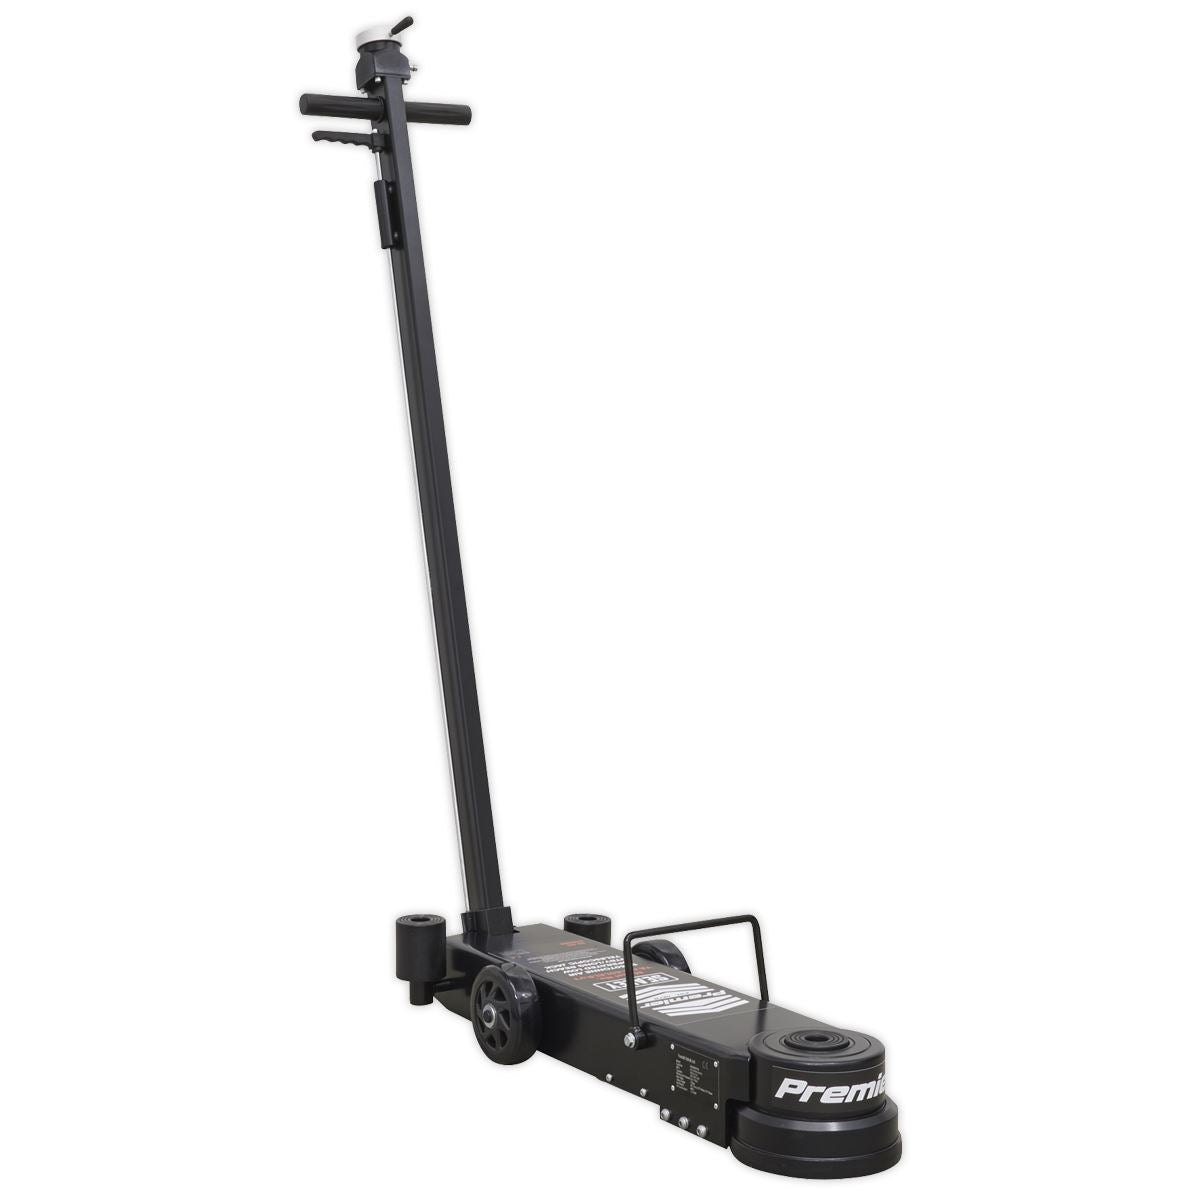 Sealey Premier Air Operated Jack 10-40 Tonne Telescopic - Long Reach/Low Profile